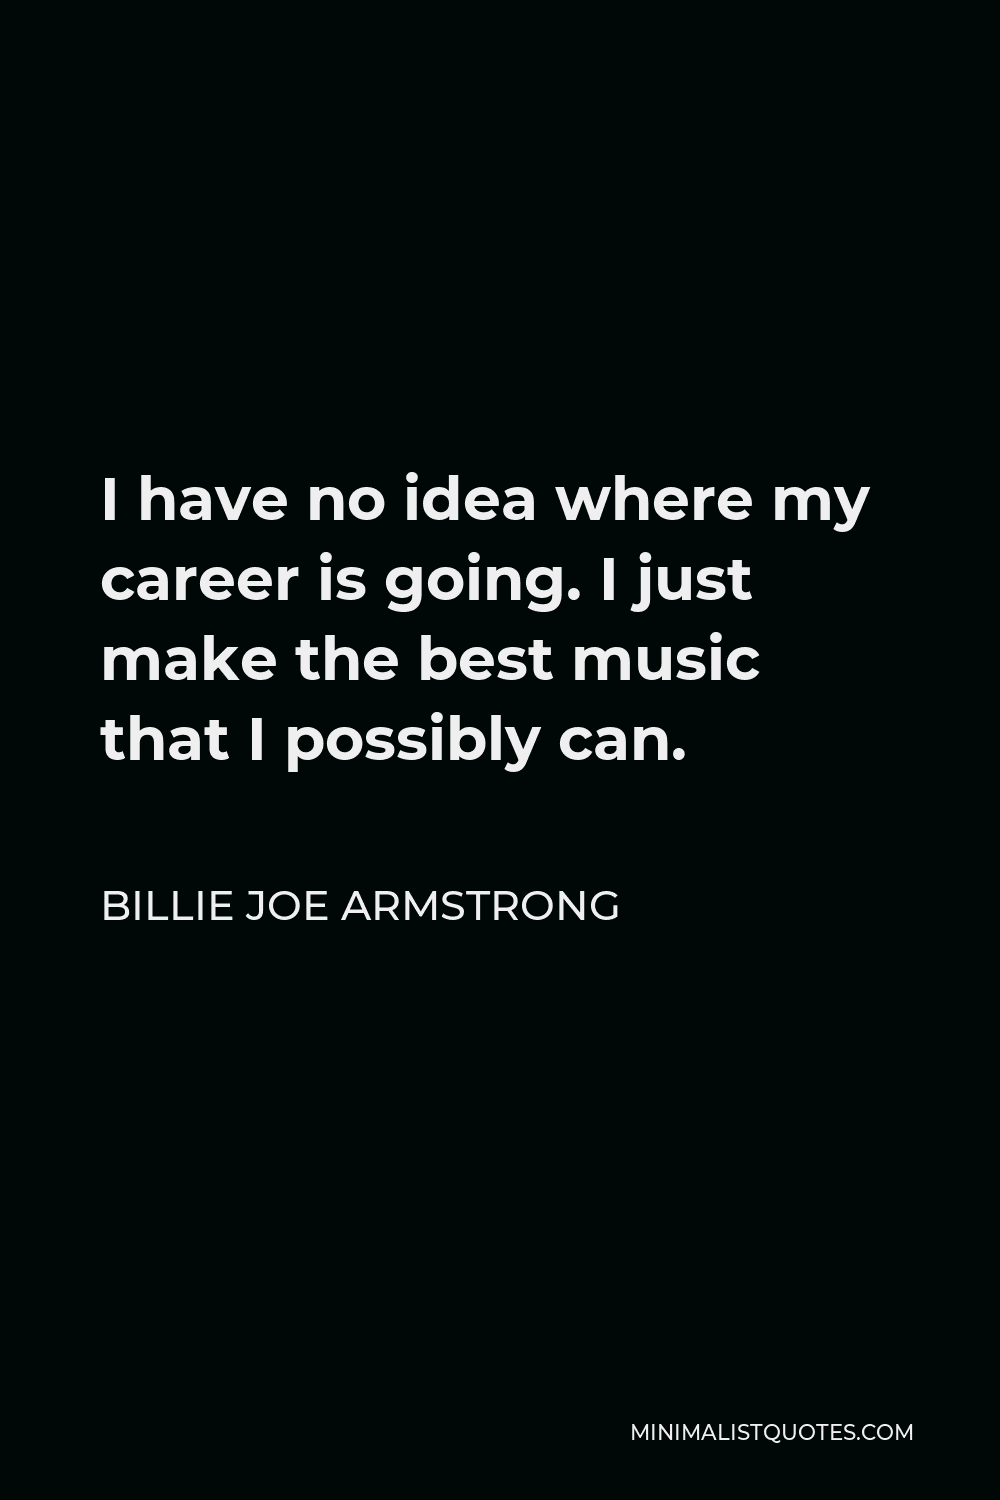 Billie Joe Armstrong Quote - I have no idea where my career is going. I just make the best music that I possibly can.